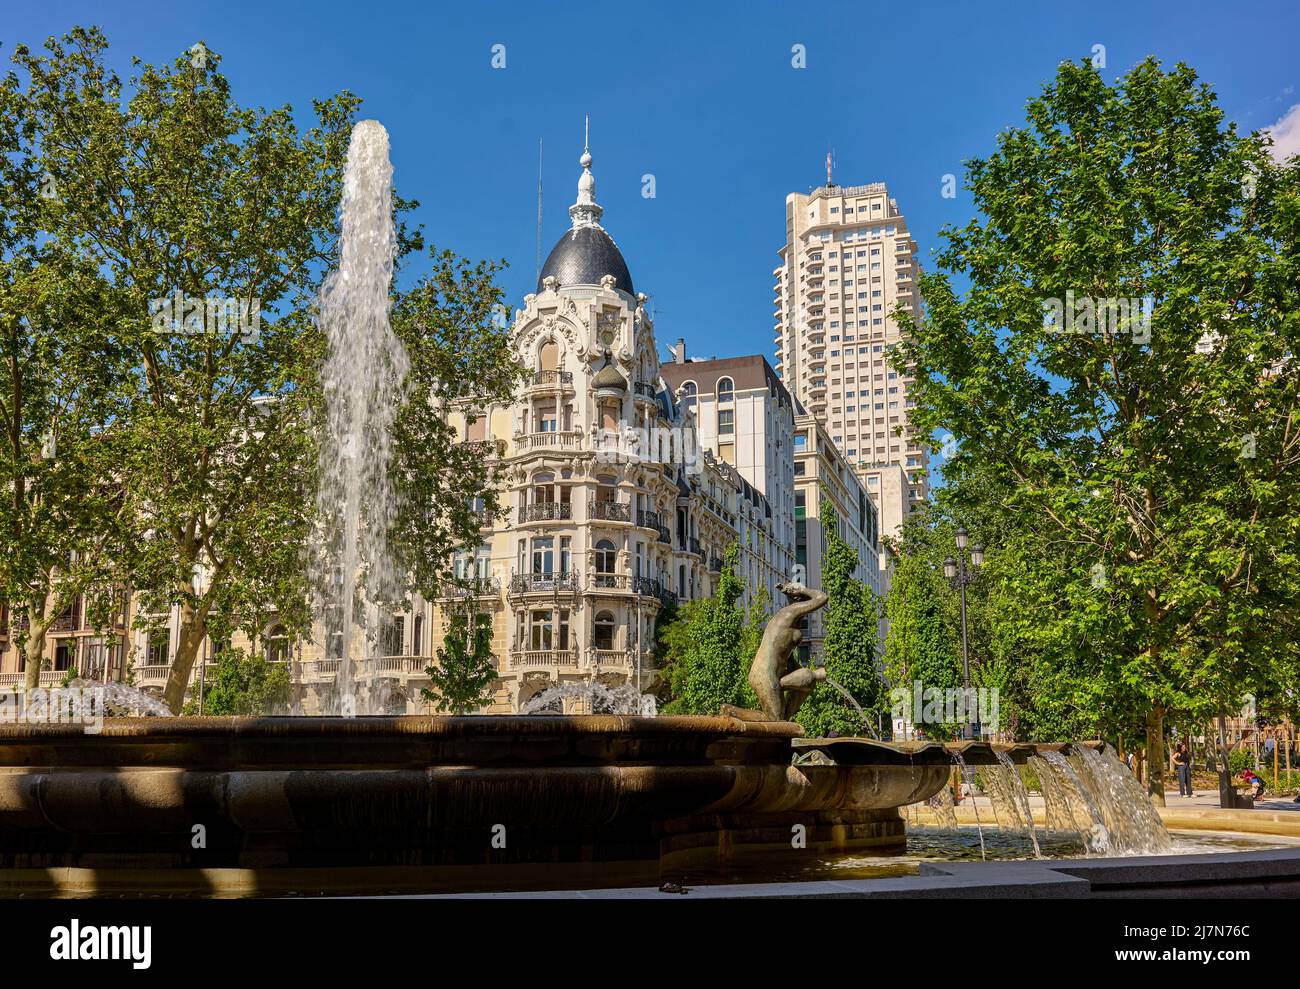 Fountain of the Shell or the Birth of Water. Plaza de España square. Madrid, Spain. Stock Photo